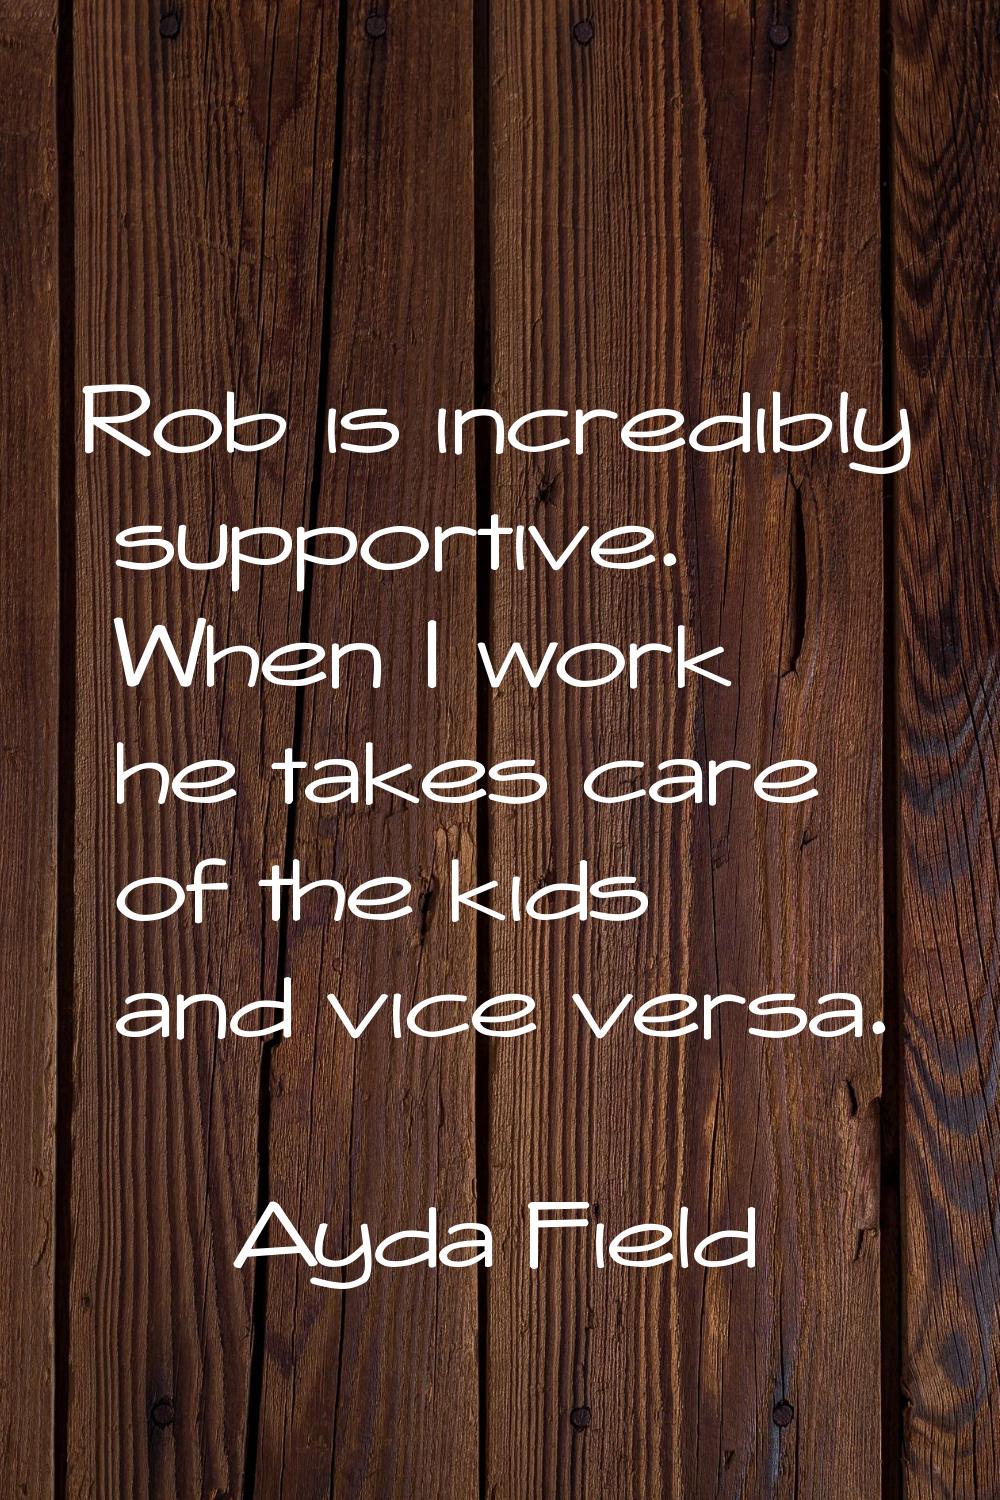 Rob is incredibly supportive. When I work he takes care of the kids and vice versa.